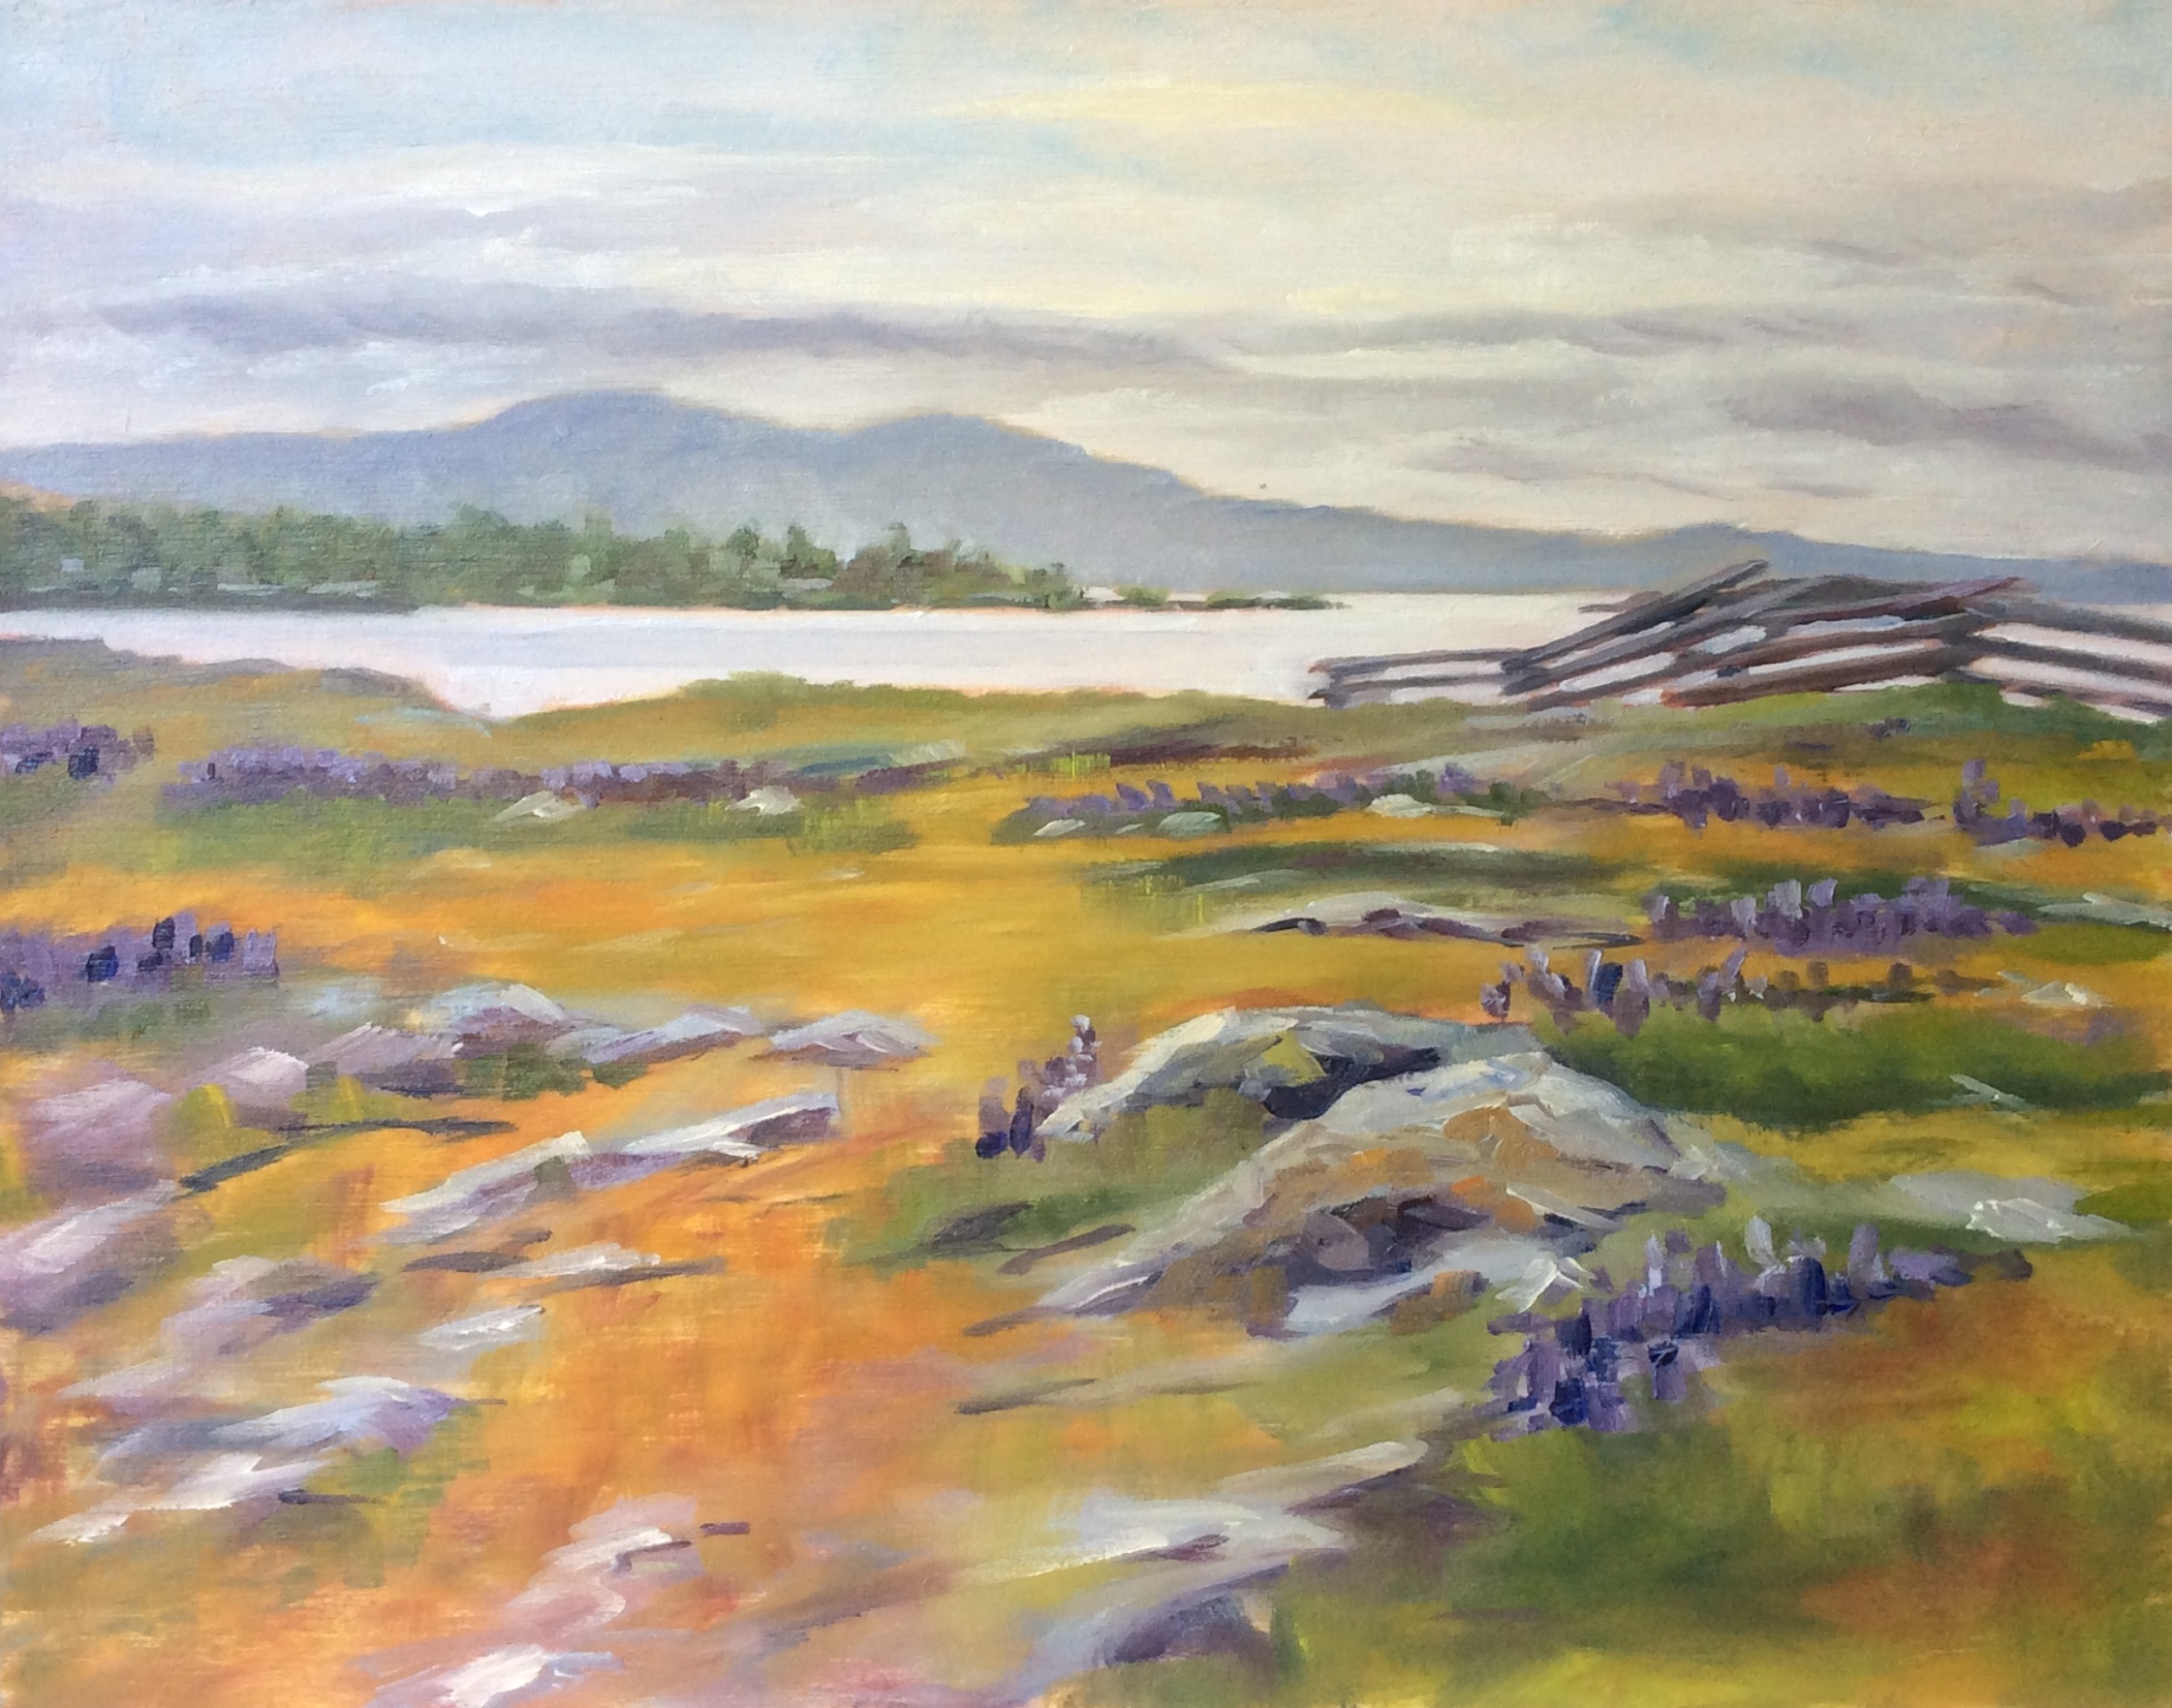   Spring Morning, Cattle Point (SOLD)   Oil 11 x 14 